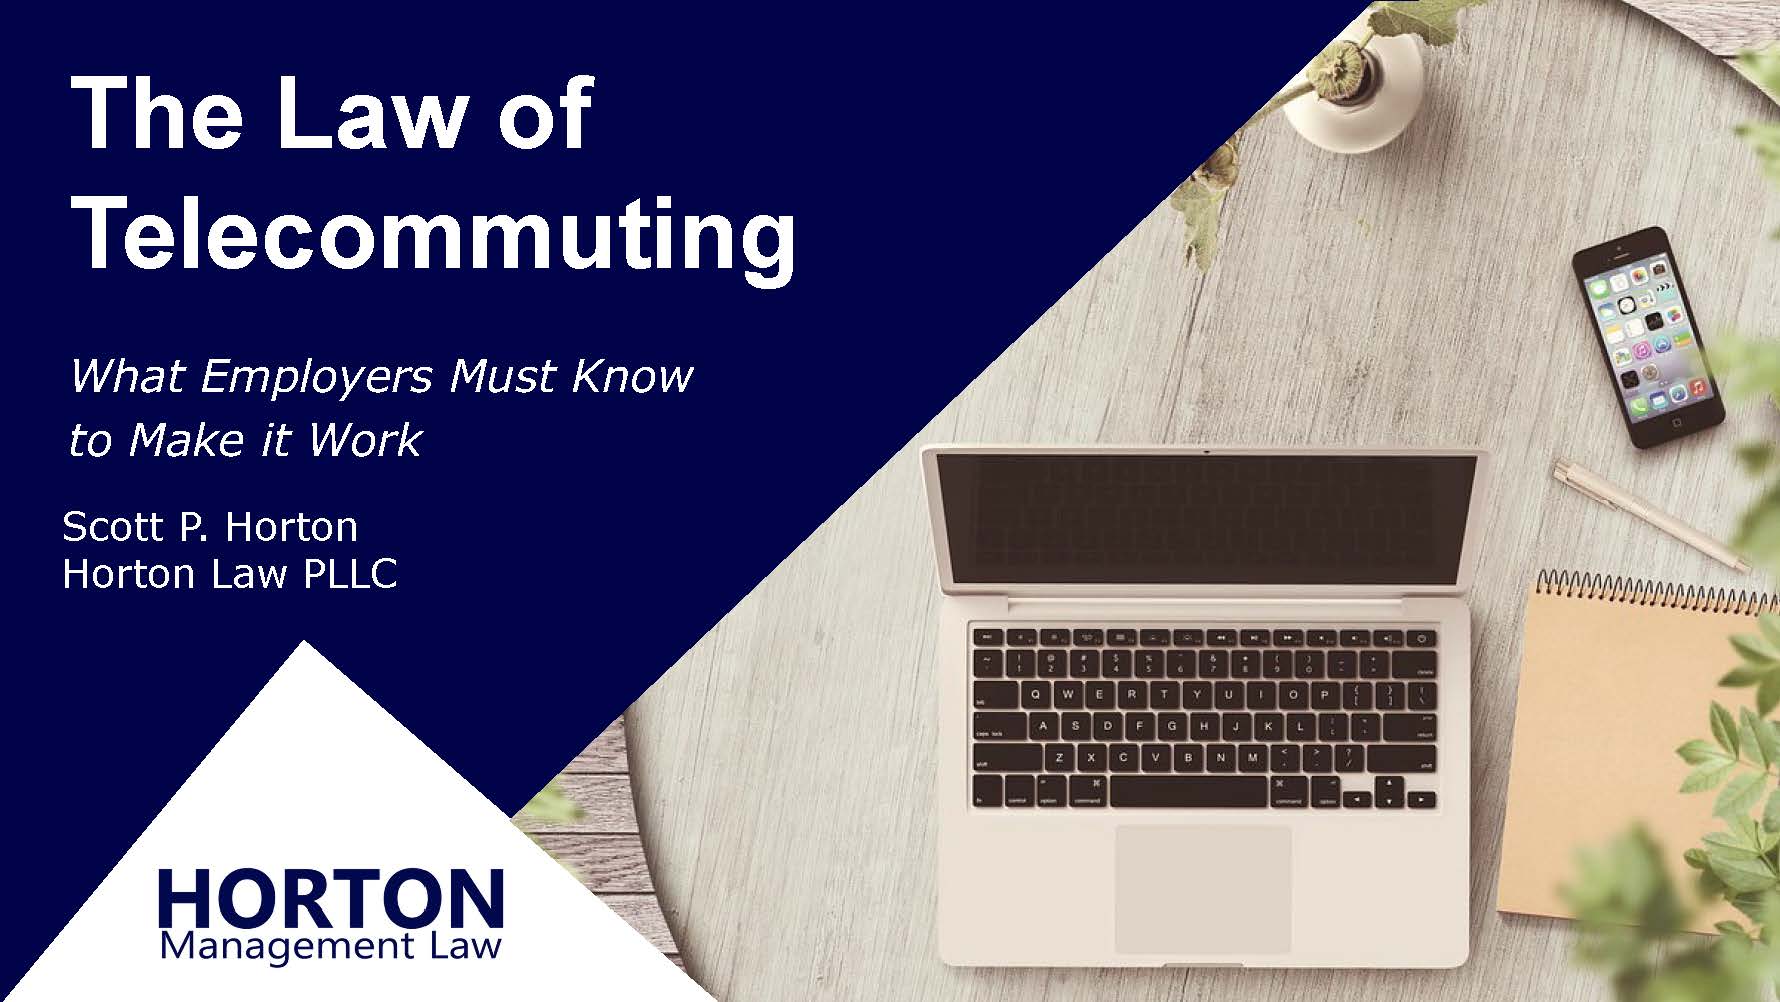 The Law of Telecommuting